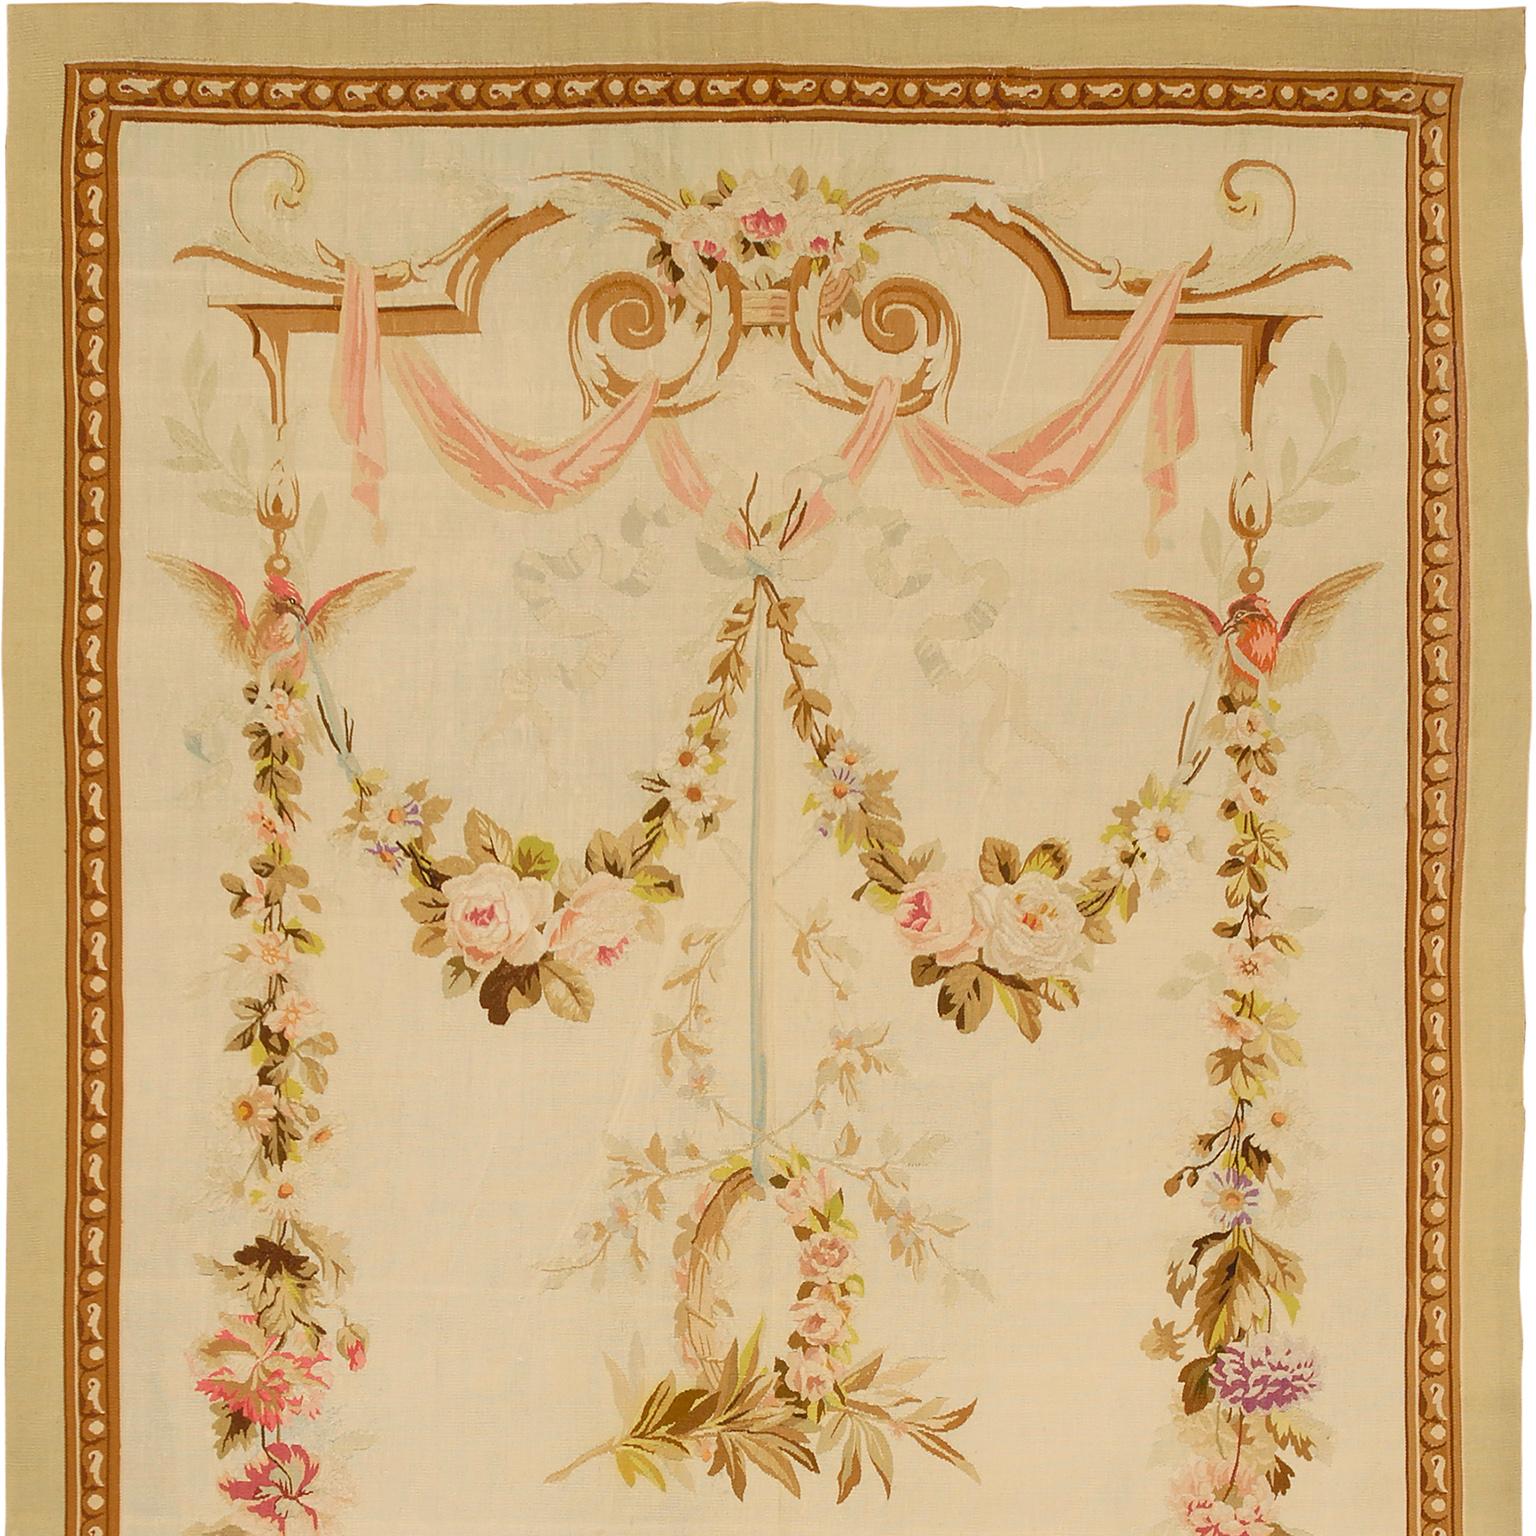 Antique French Aubusson rug/runner
France, circa 1870
Handwoven.